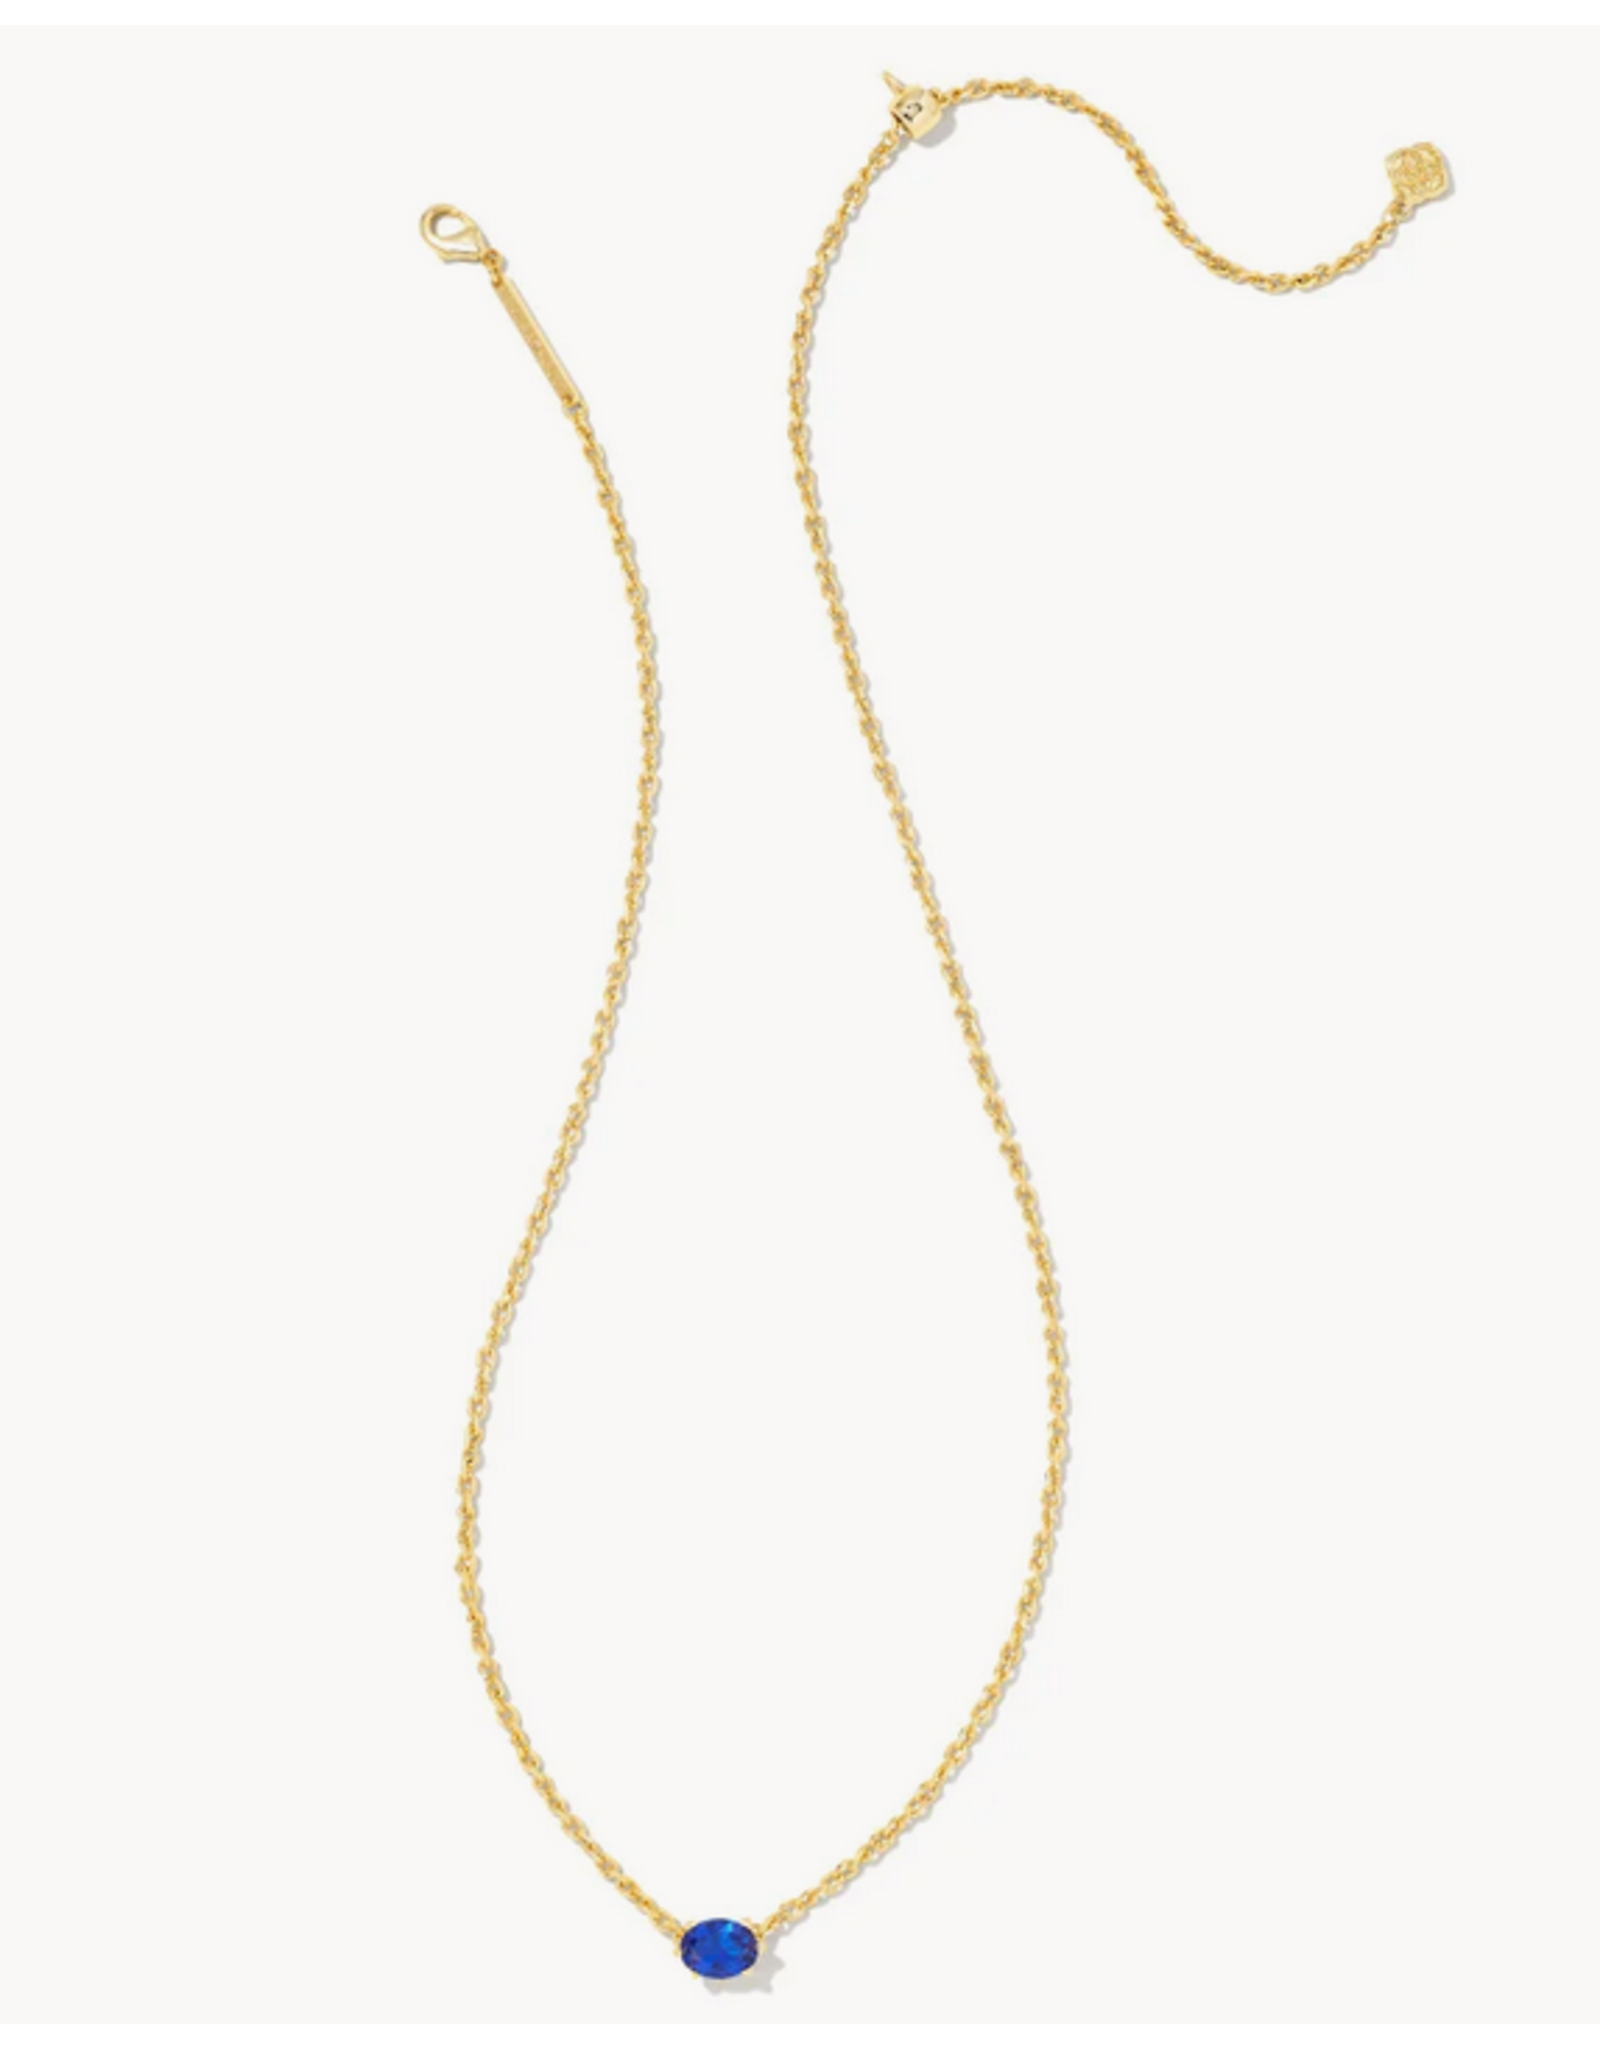 Kendra Scott Cailin Necklace Blue Crystal on Gold (SEPT.)